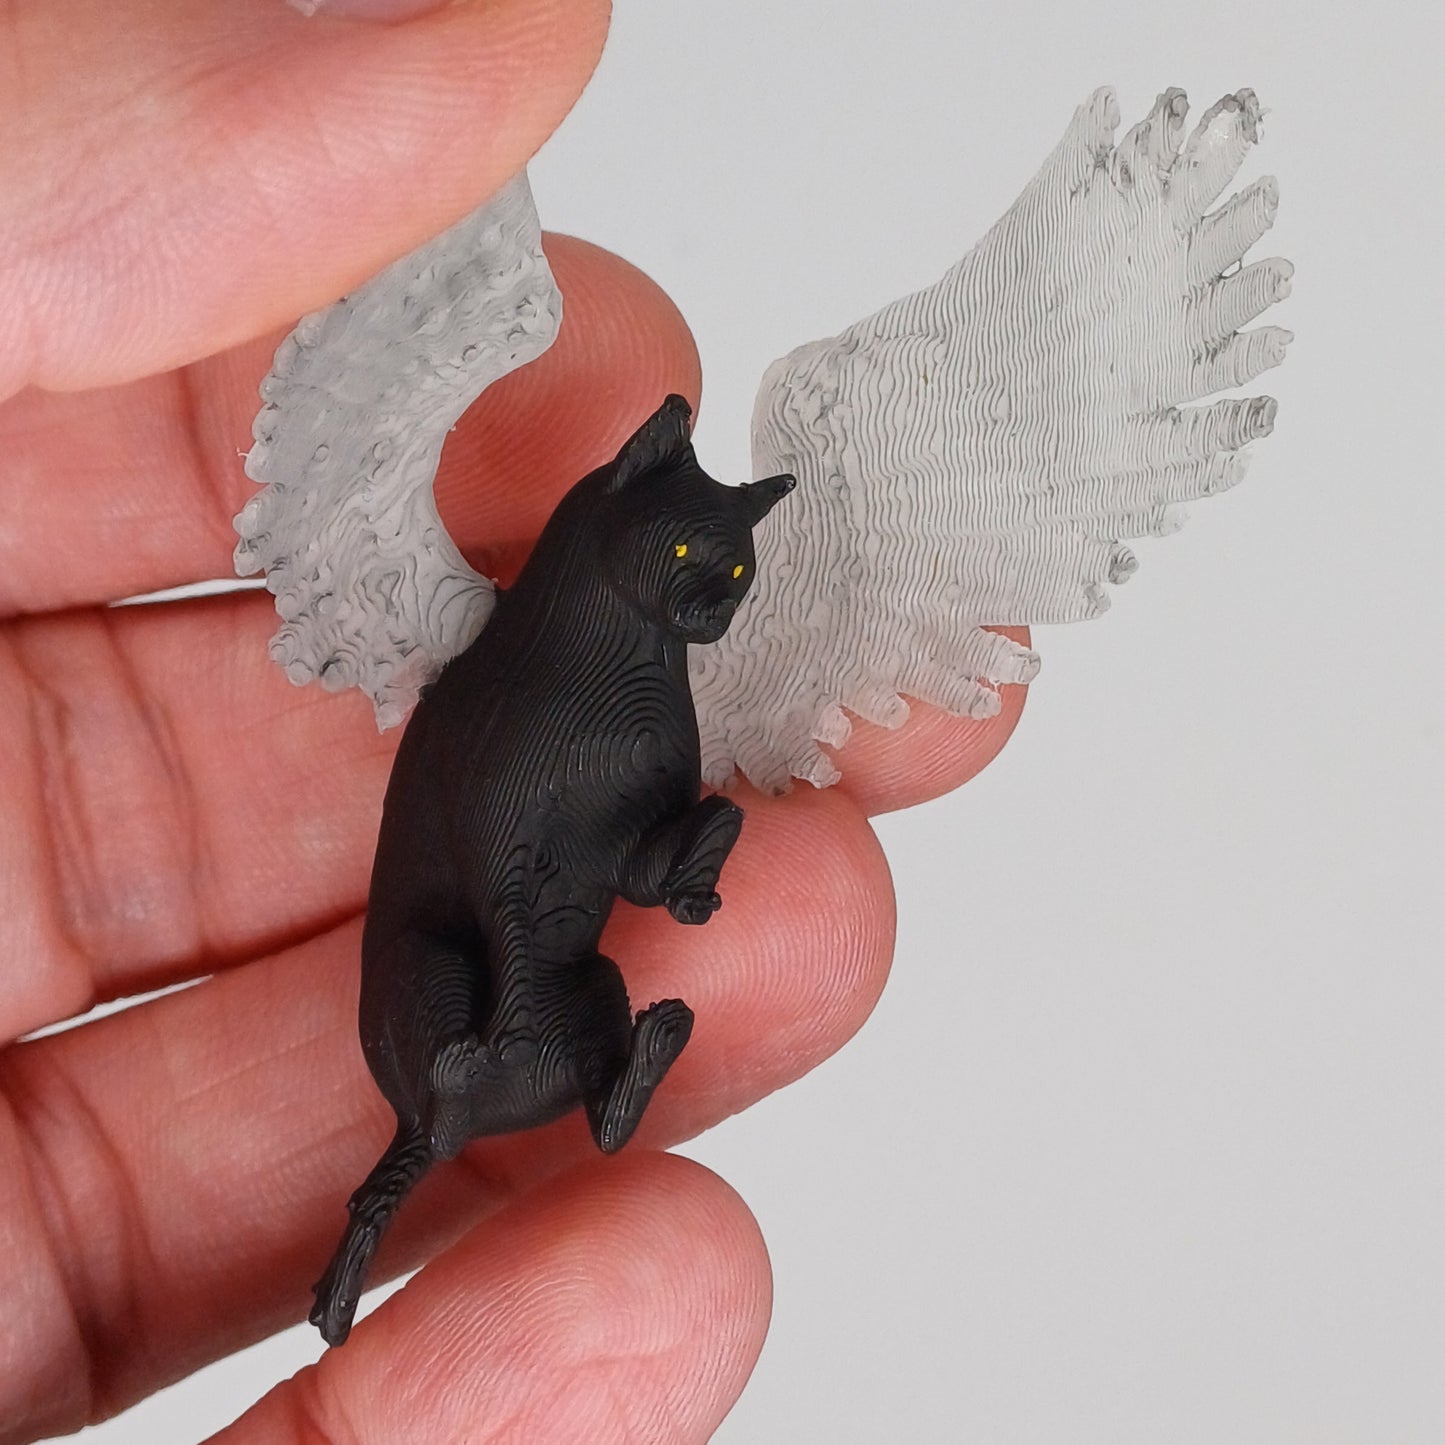 1:12 scale flying cat